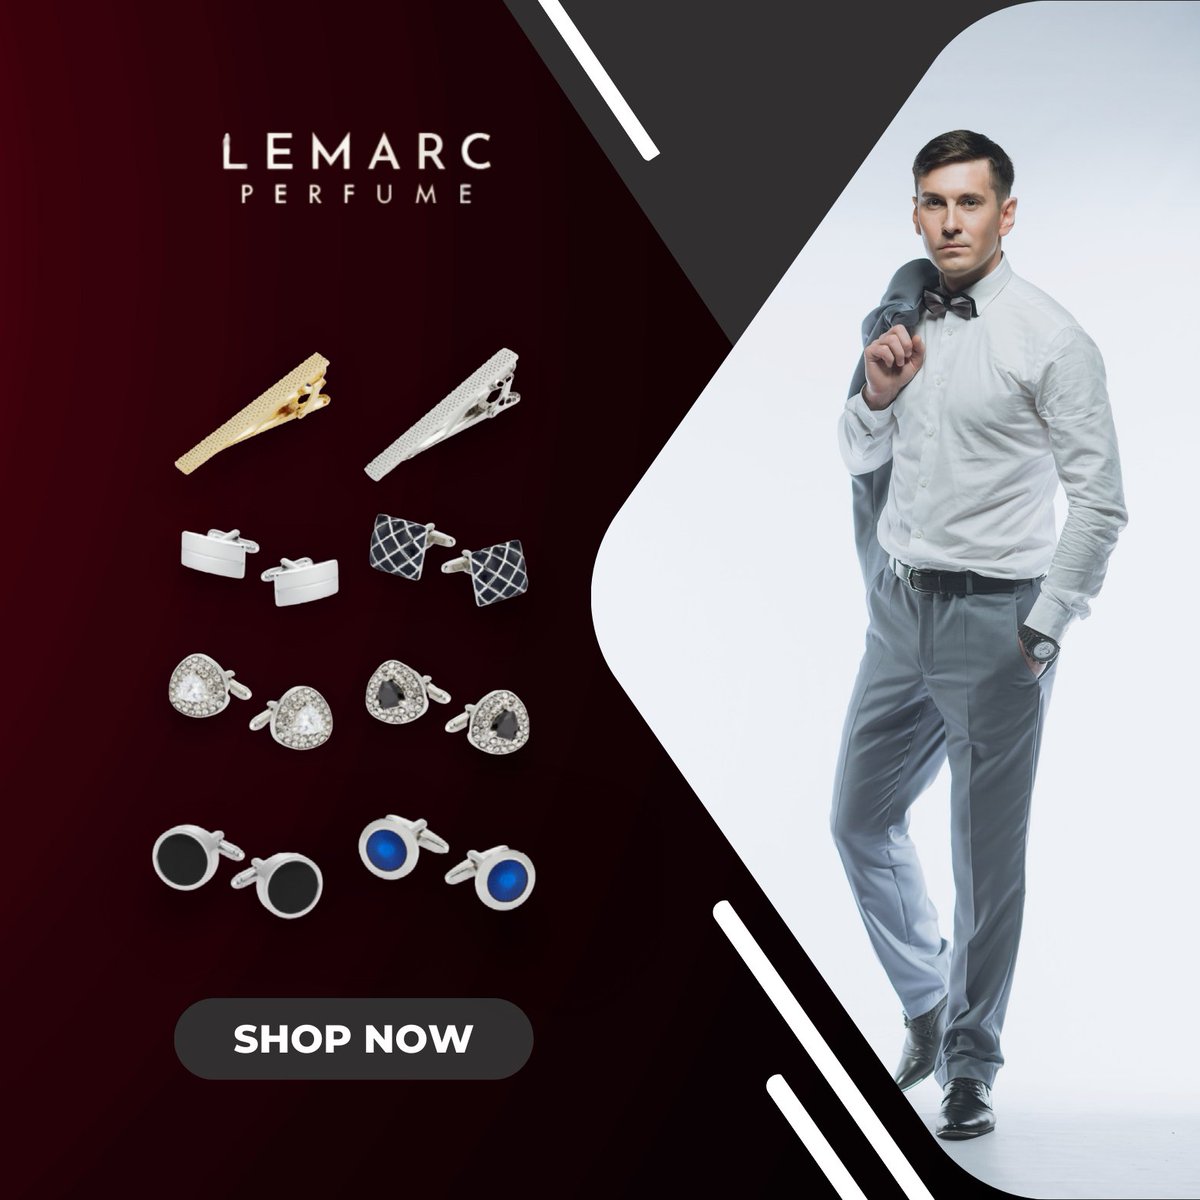 Being noticed for elegance and sophistication is only for those who wear extraordinary accessories. Choose yours at lemarcperfume.com
.
.
.
#mensfashion #menswear #influencerstyle #styleofmen #mensstyles #mensfashiontrends #ootdmen